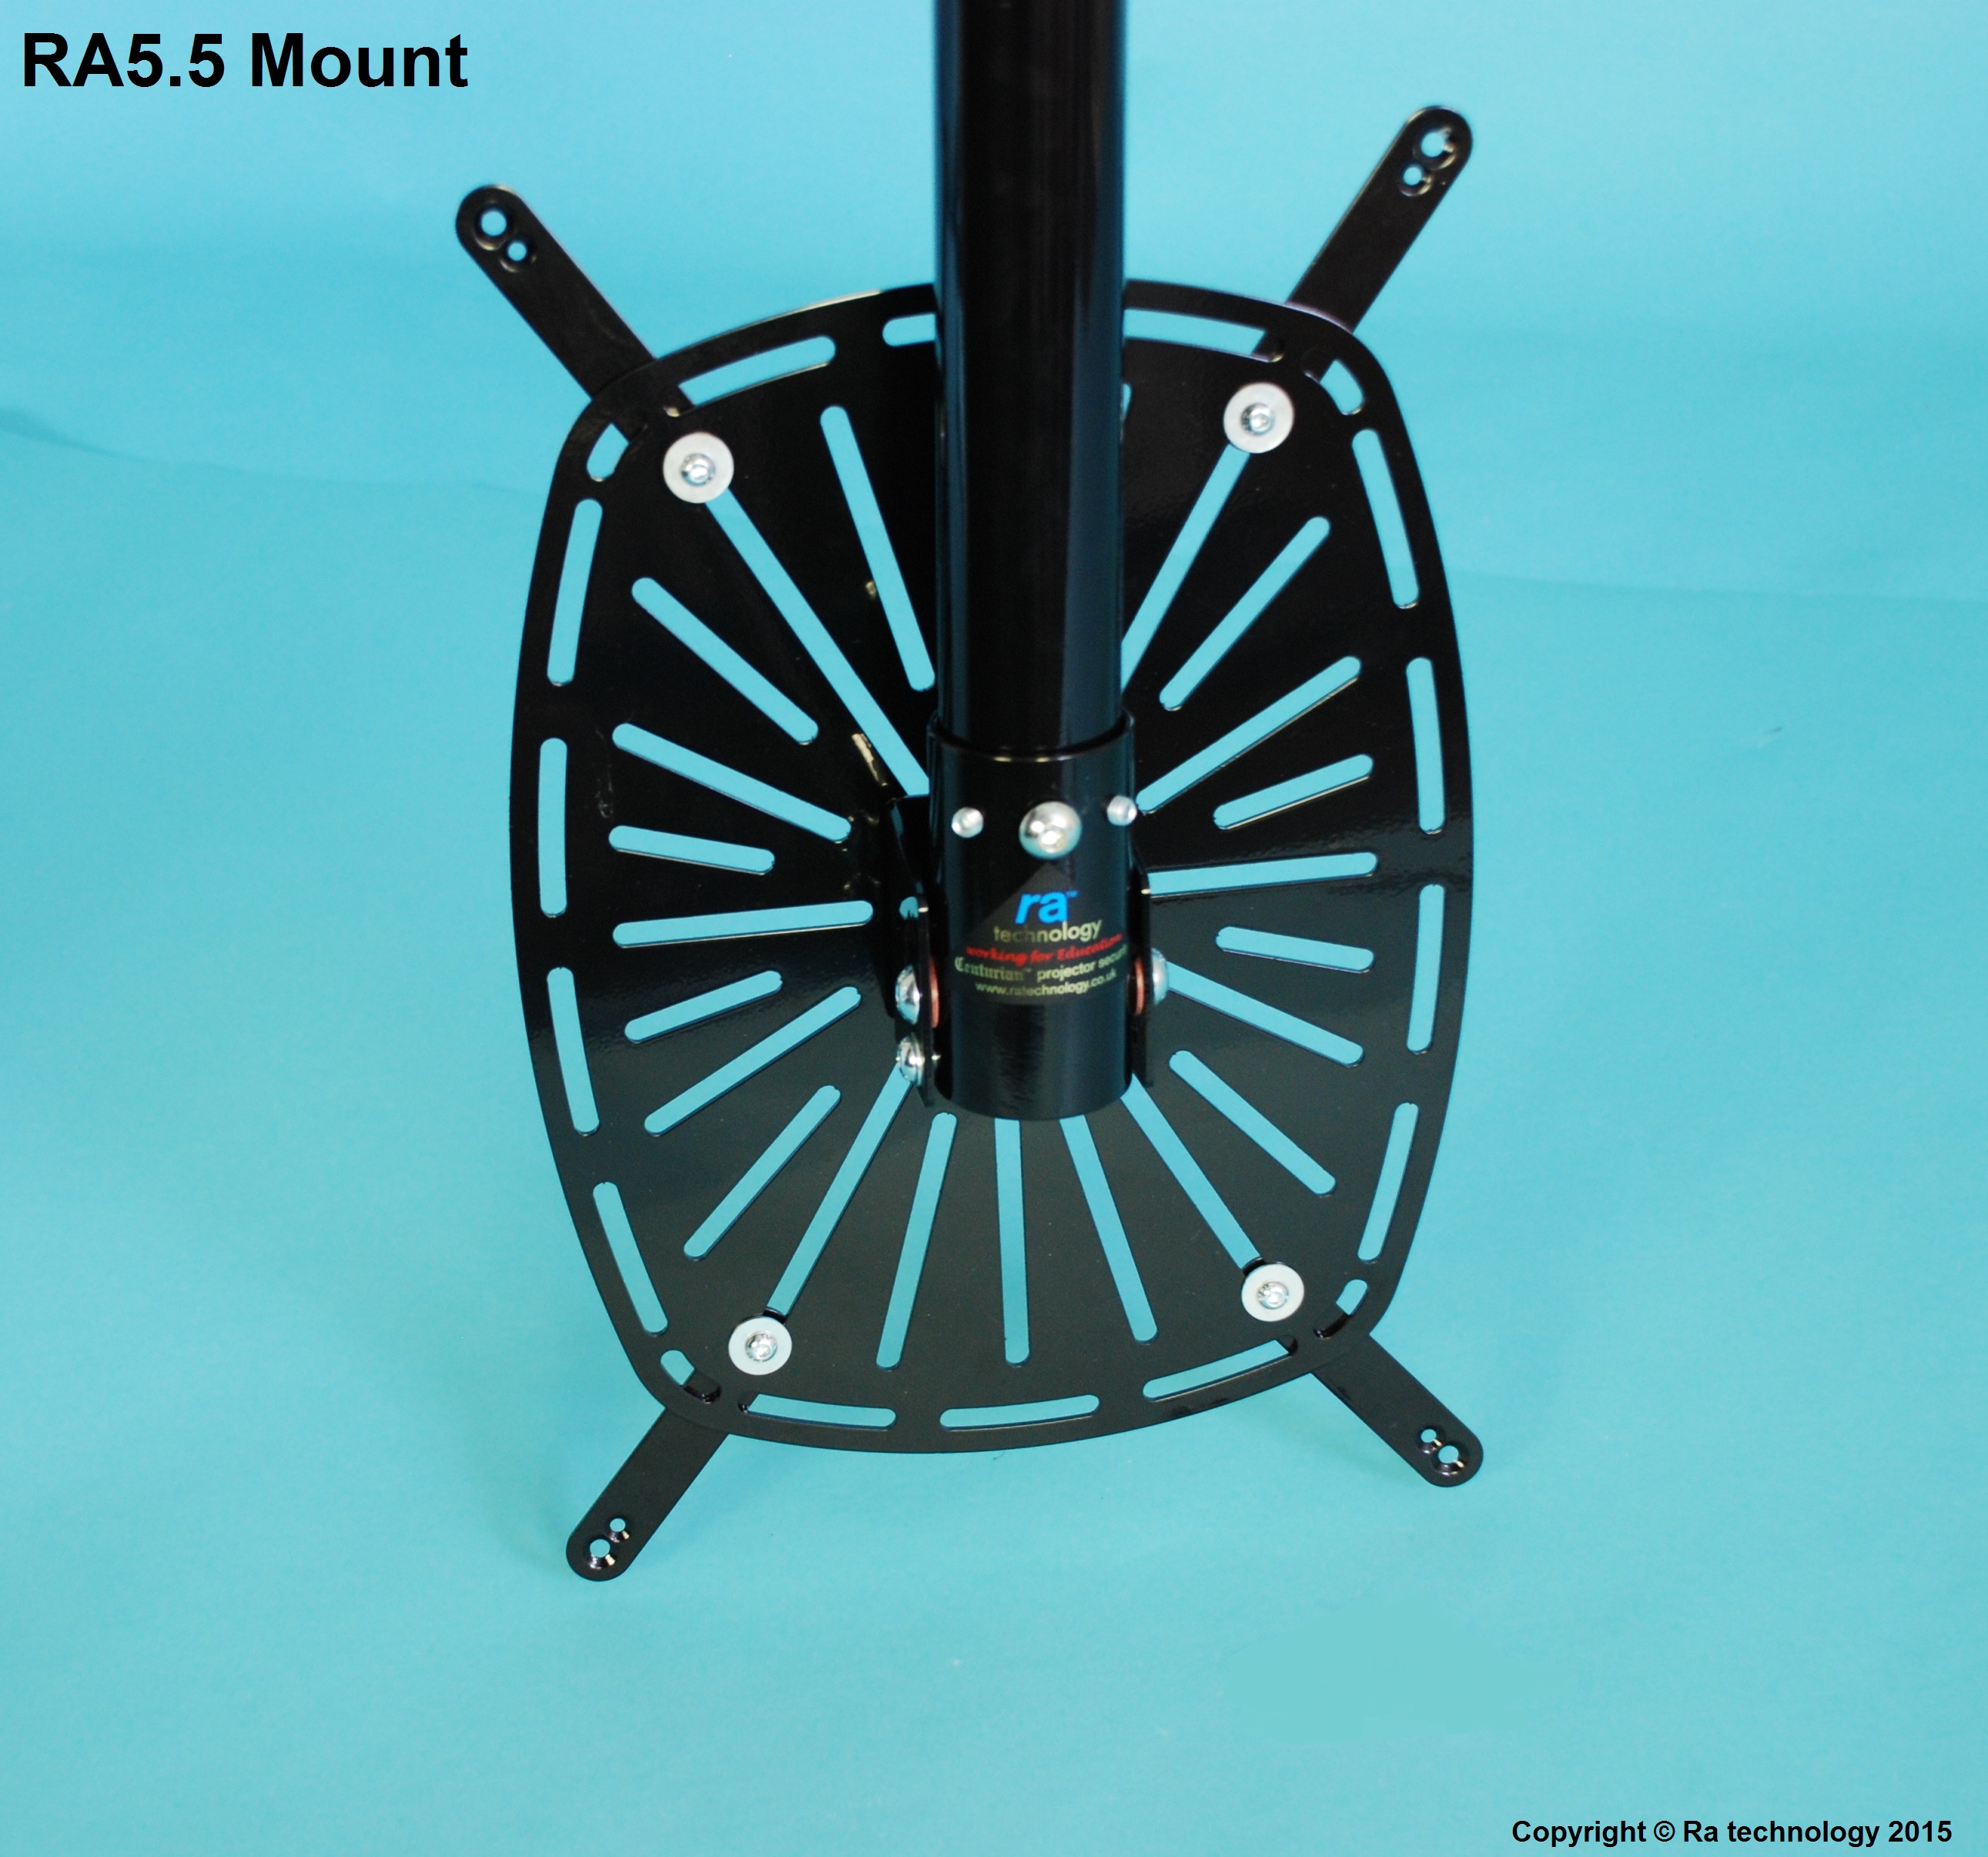 RA5.5 Universal Projector Mount. Large